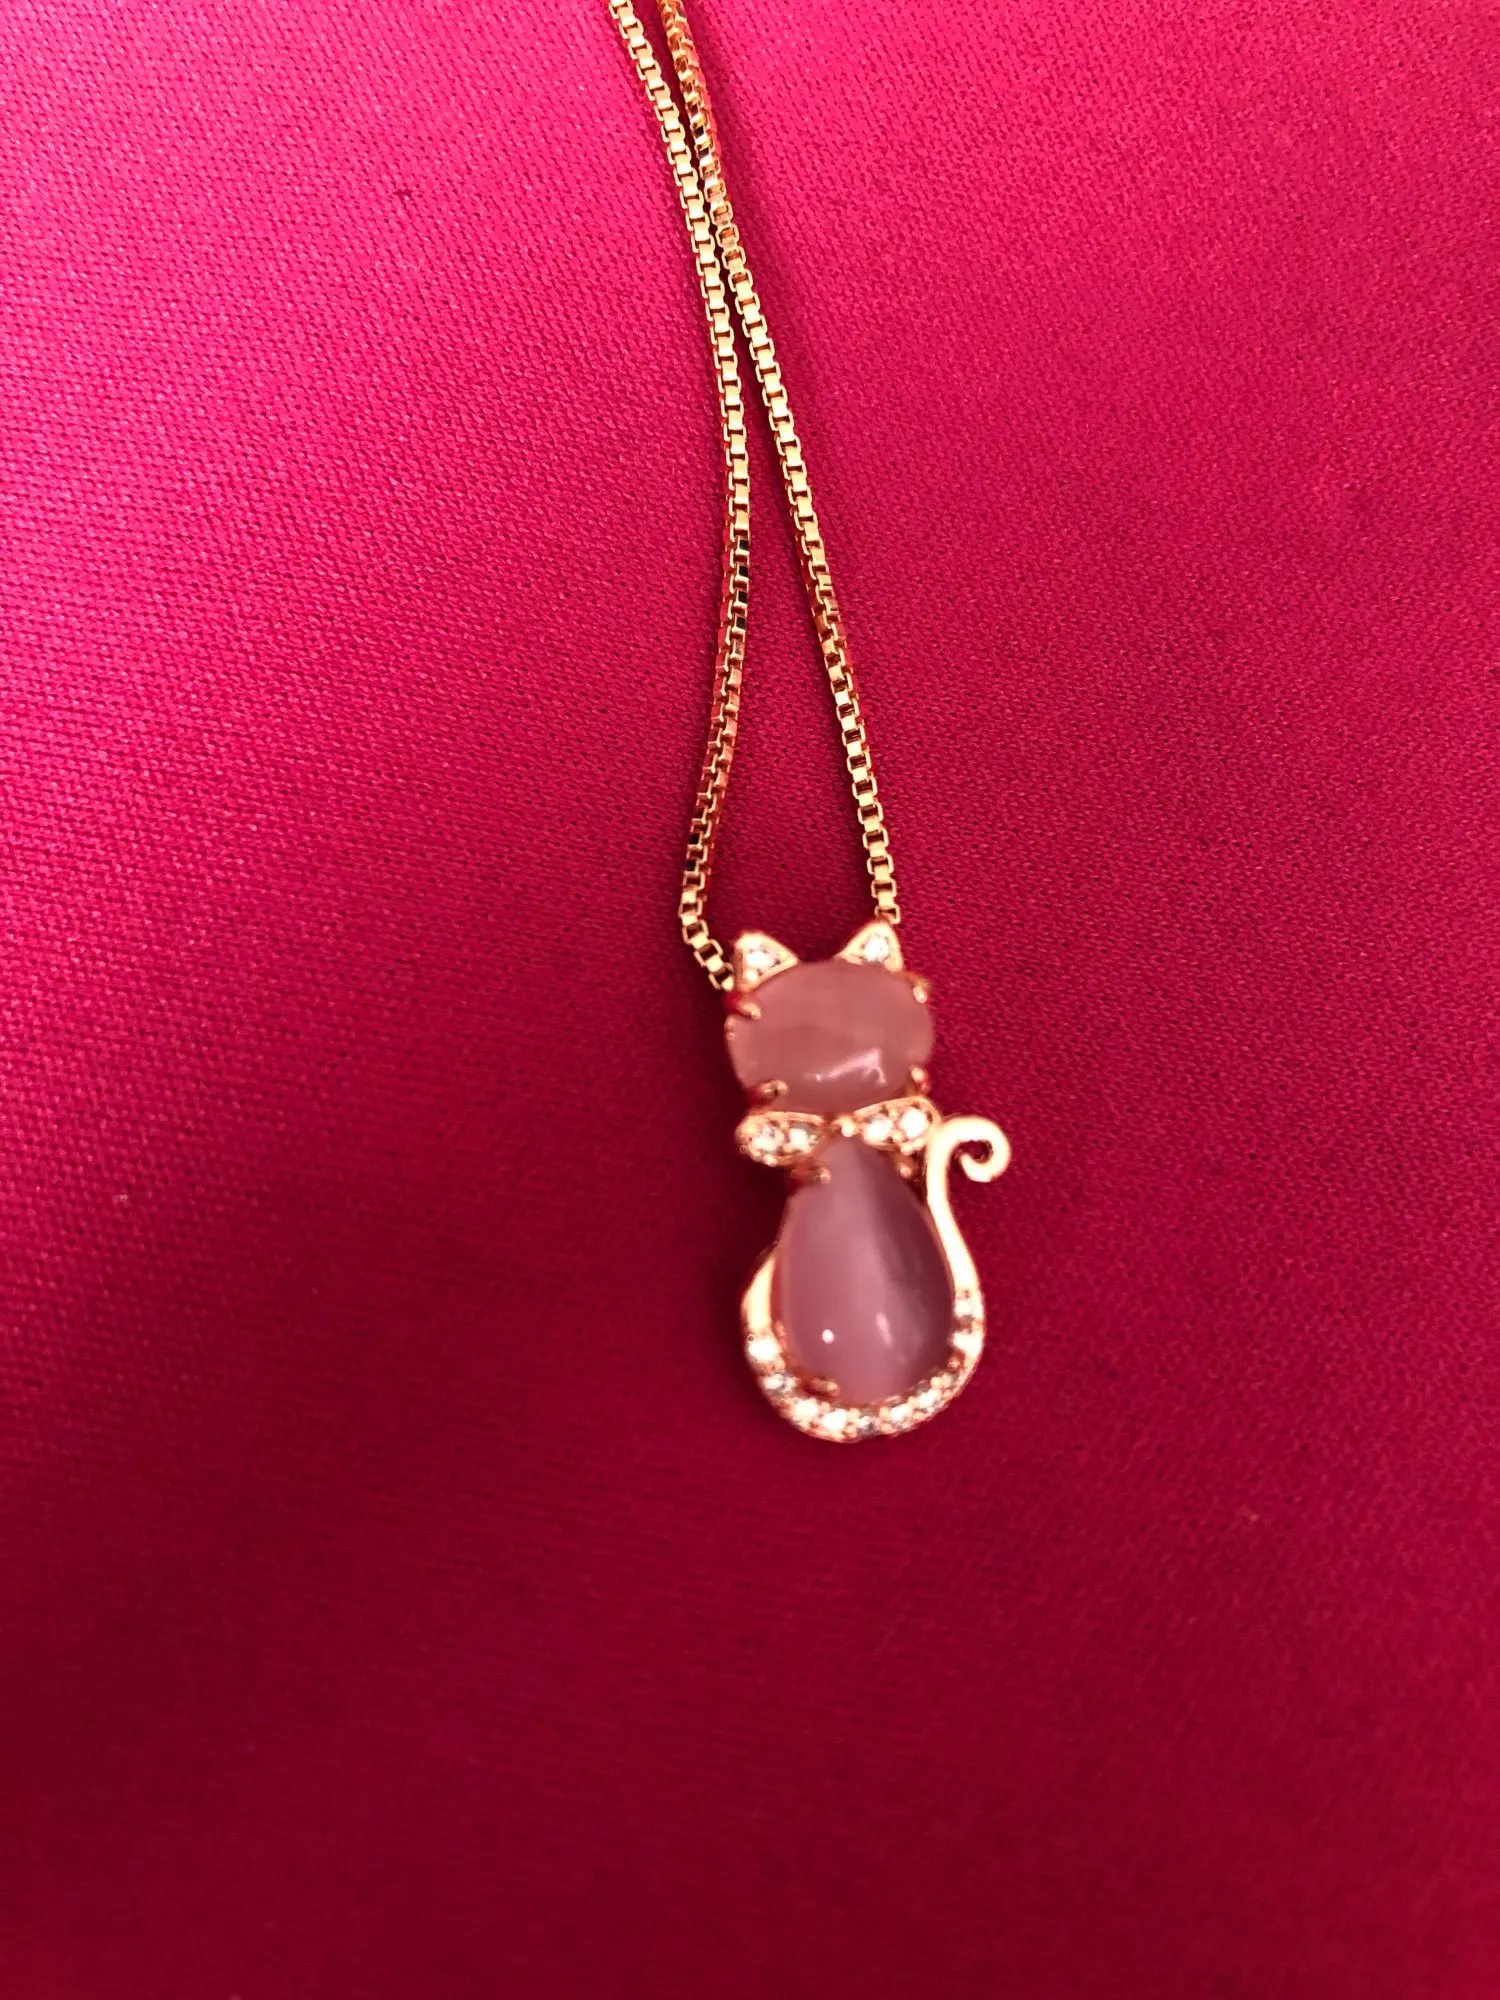 Cute Cat opal stone chain necklace in pink. Embellished pendant necklace for positive energy | Loli the Cat